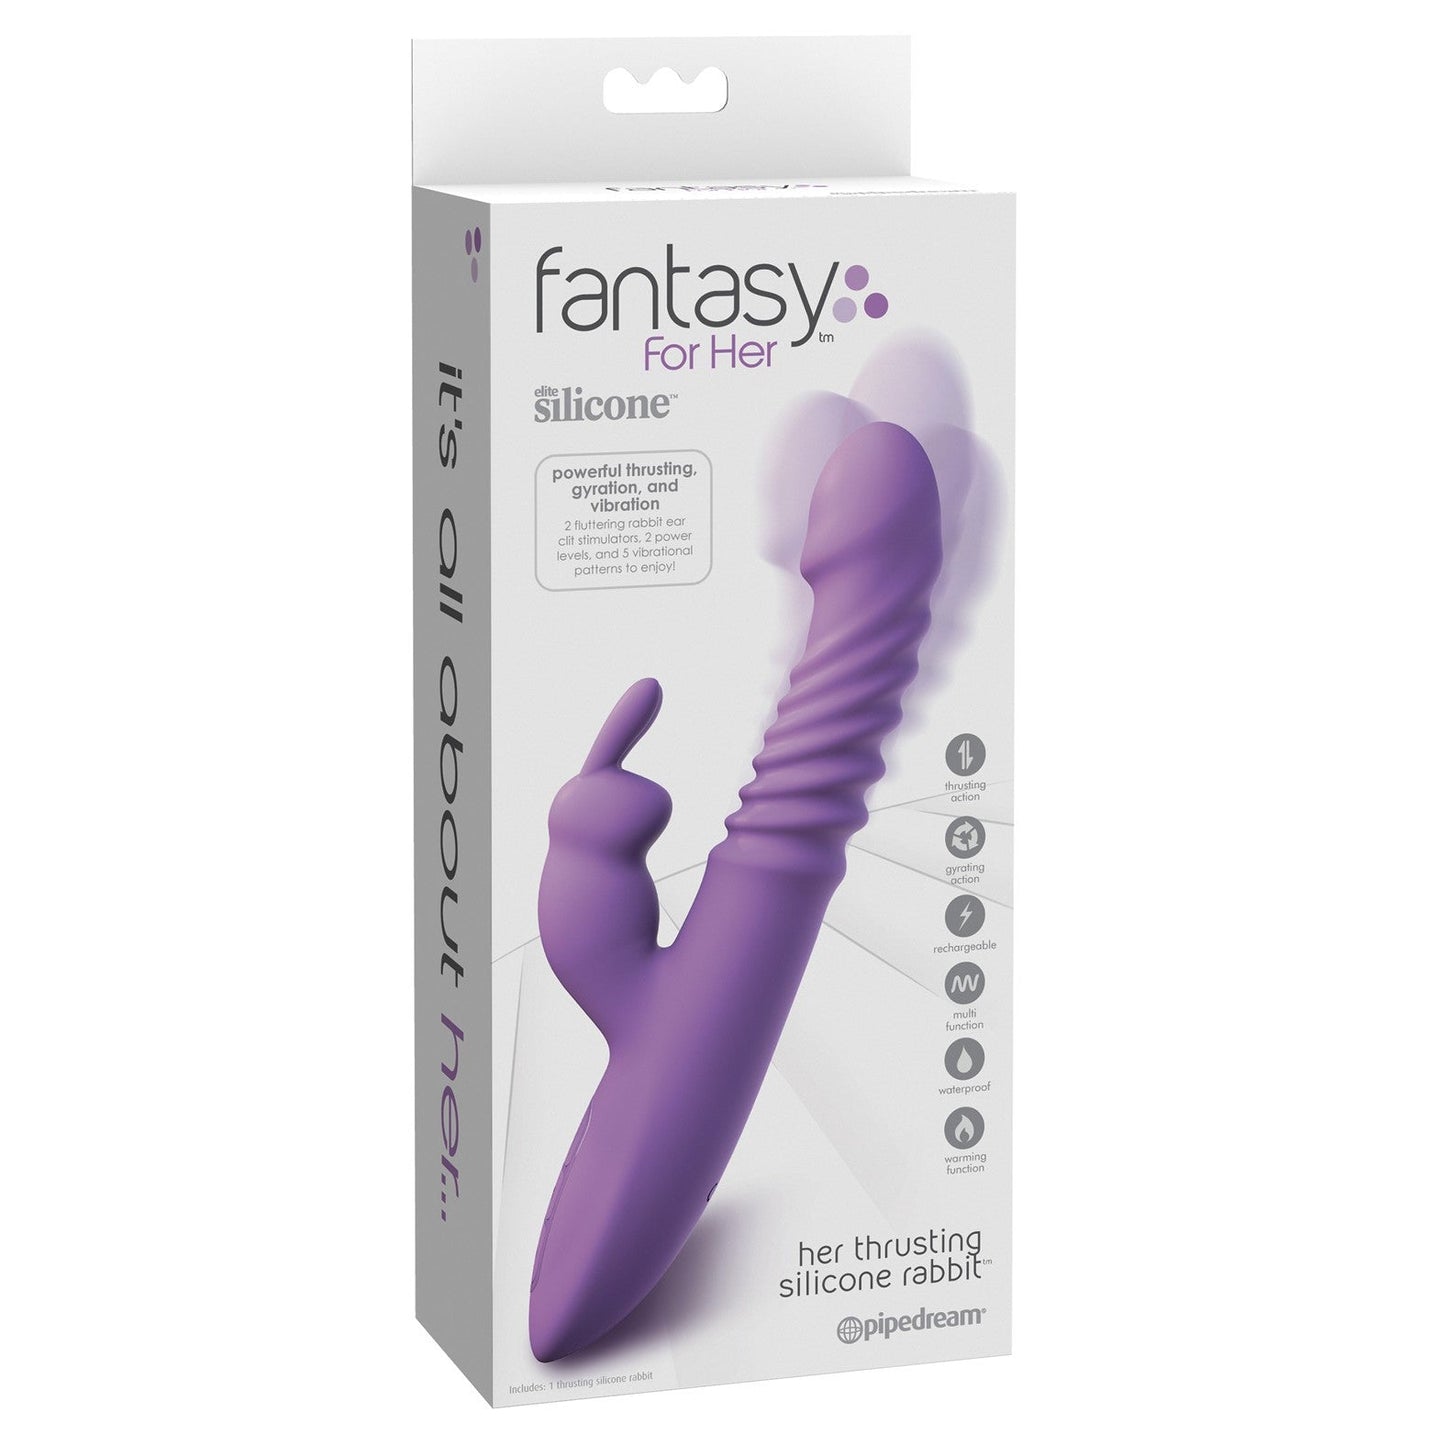 Fantasy for Her Her Thrusting Silicone Rabbit G-bliss O-maker